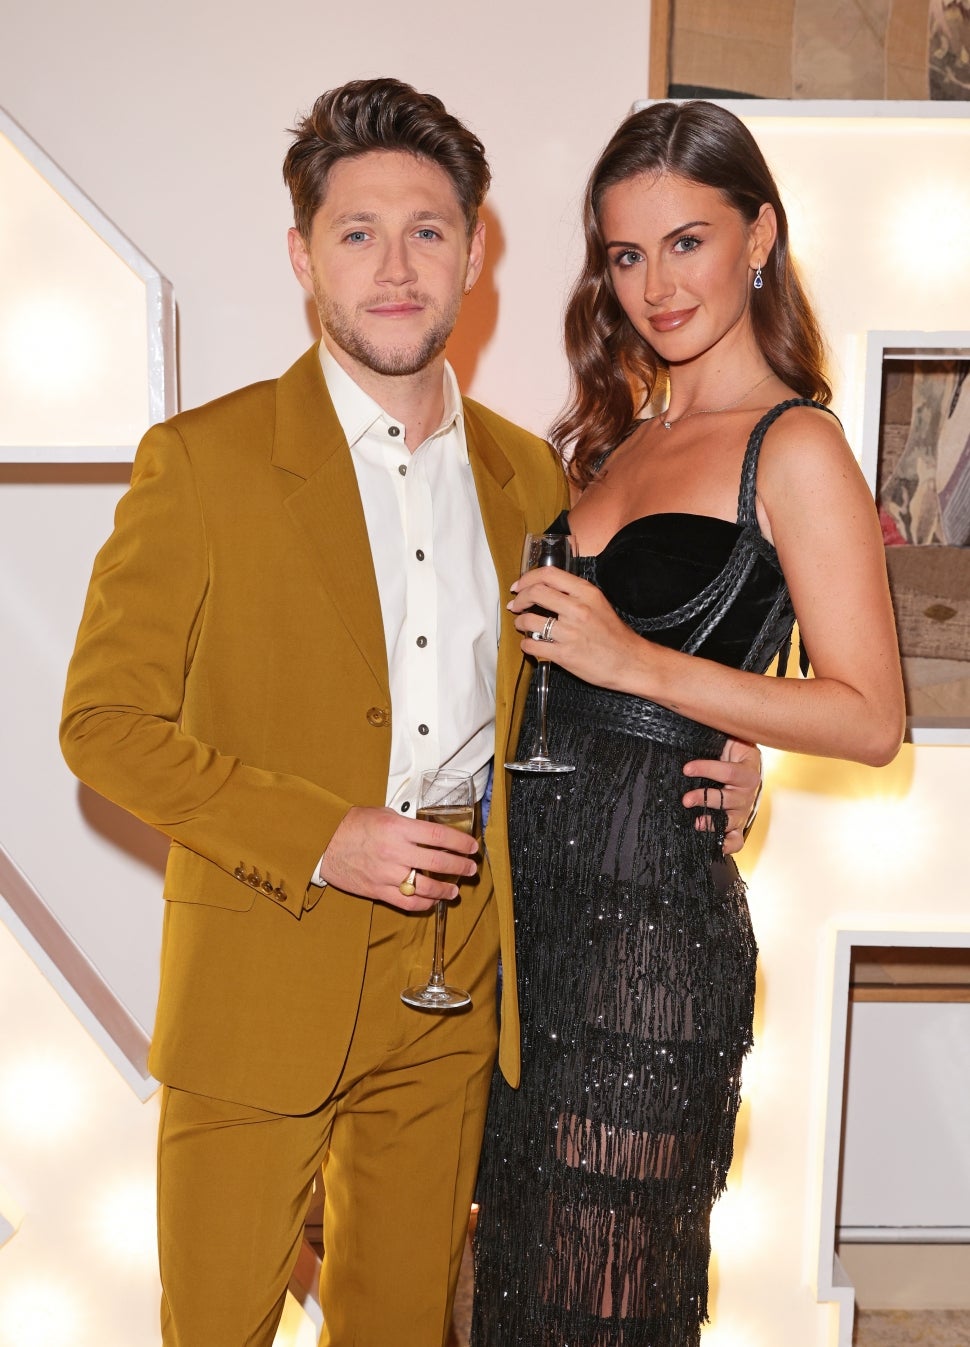 Niall Horan and Mia Woolley attend the Horan & Rose Show: Modest! Golf co-founder Niall Horan and Justin Rose brought the world of music and sport together at The Grove, presenting an evening of entertainment to raise money for The Black Heart Foundation on September 03, 2021 in Watford, England.